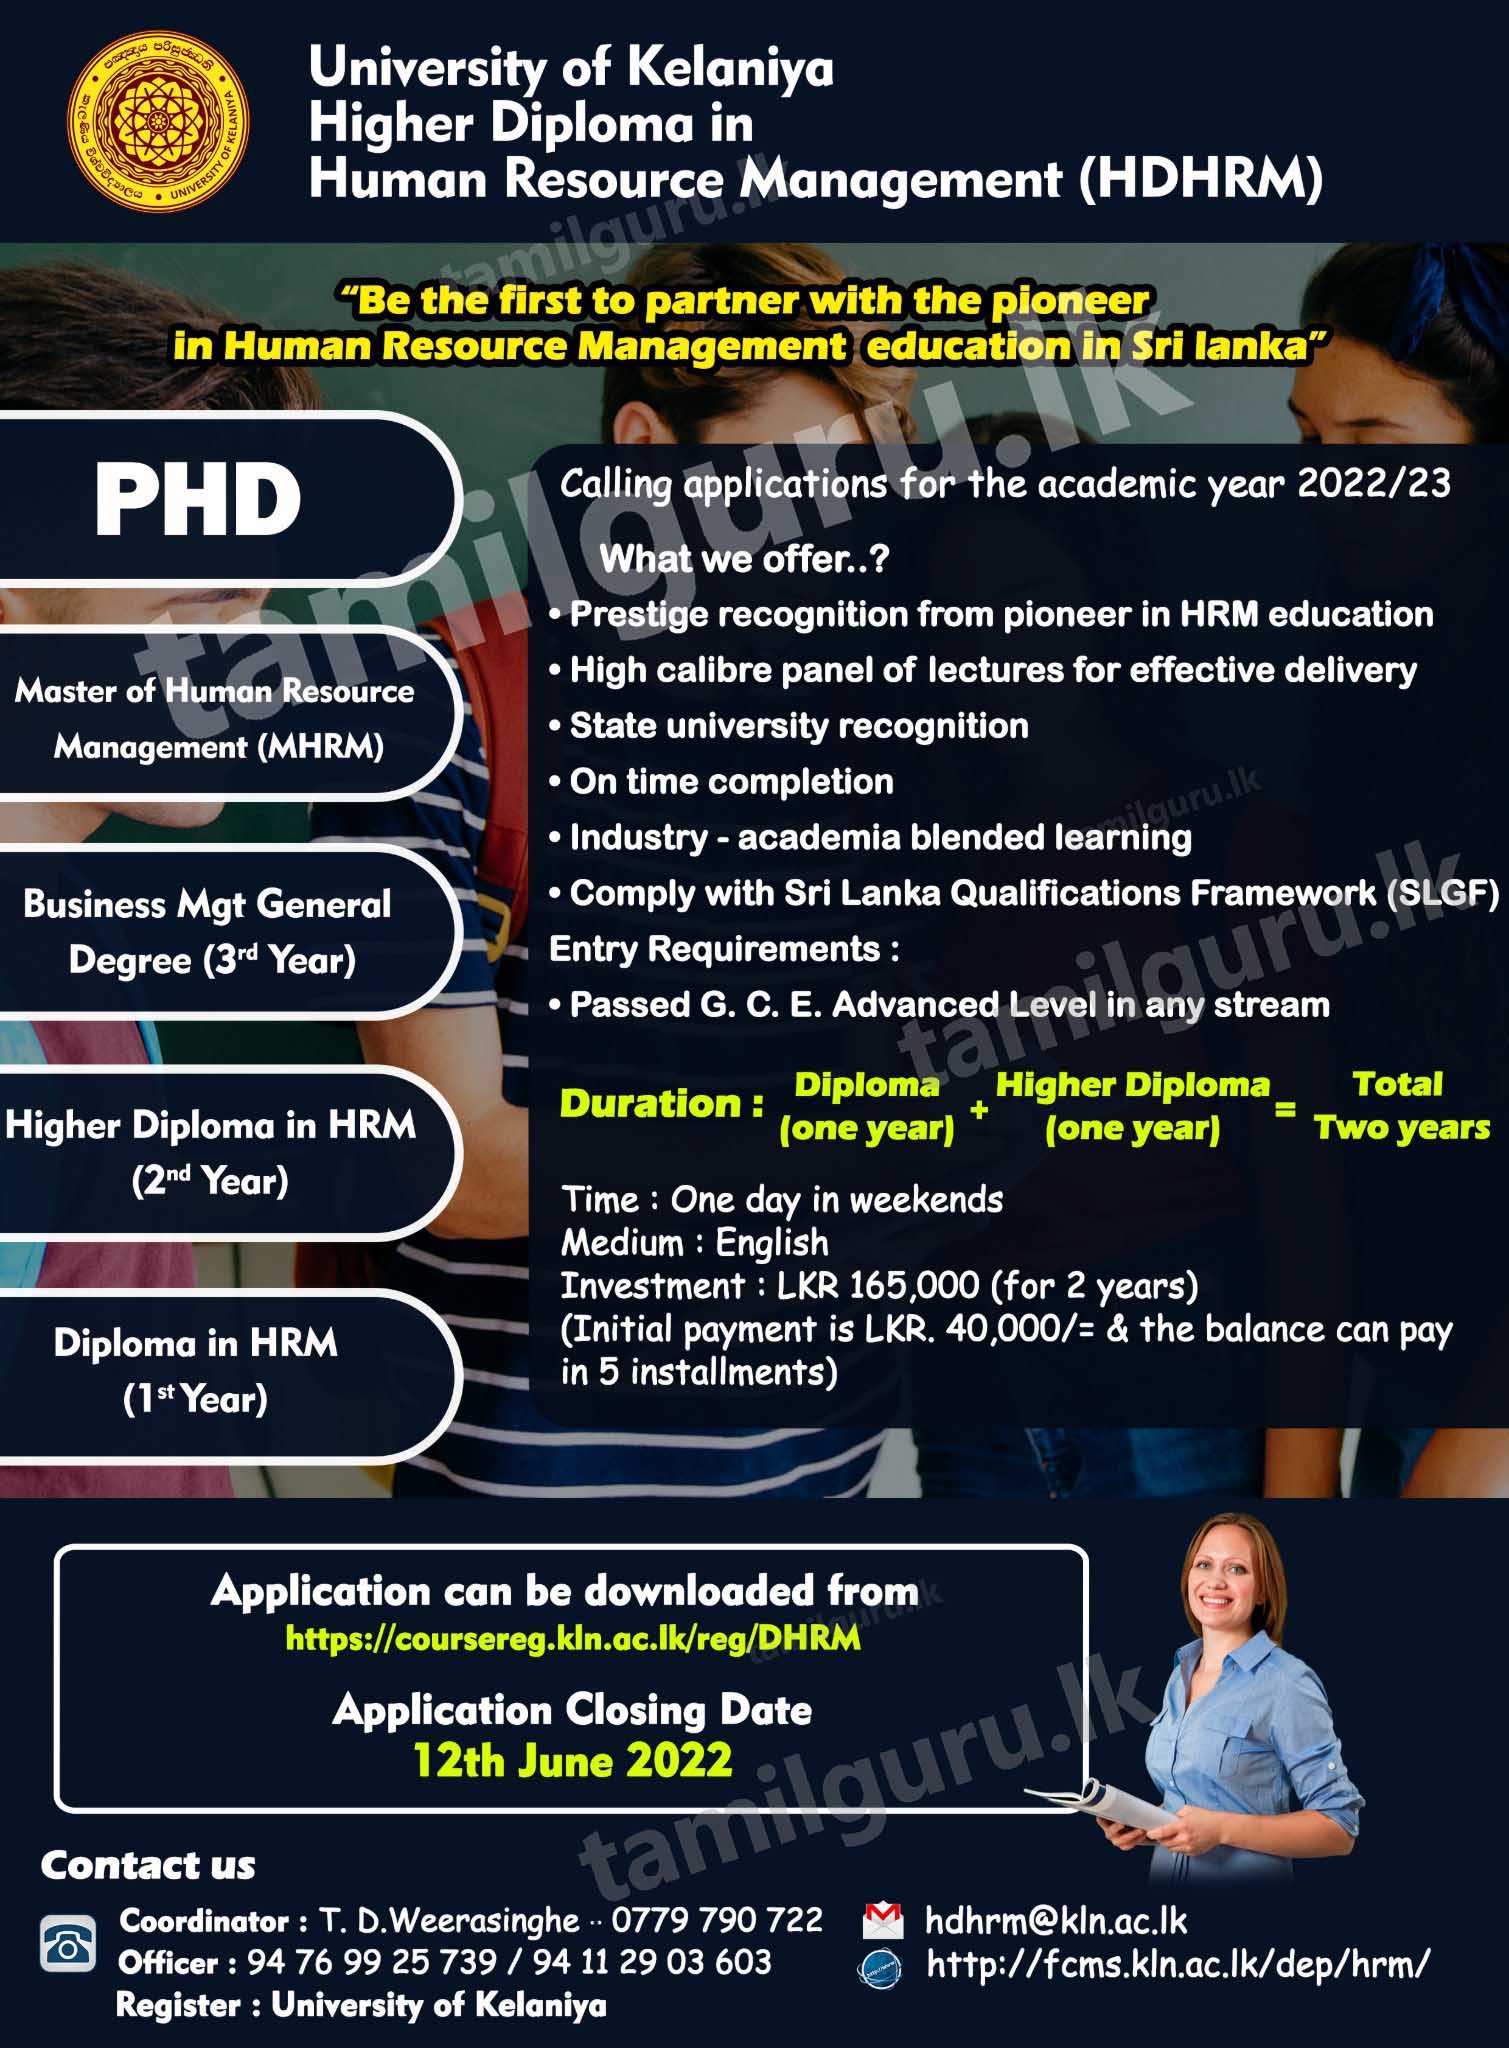 Calling Applications for Diploma / Higher Diploma in Human Resource Management (HDHRM) Programme (2022/2023) Conducted by University of Kelaniya